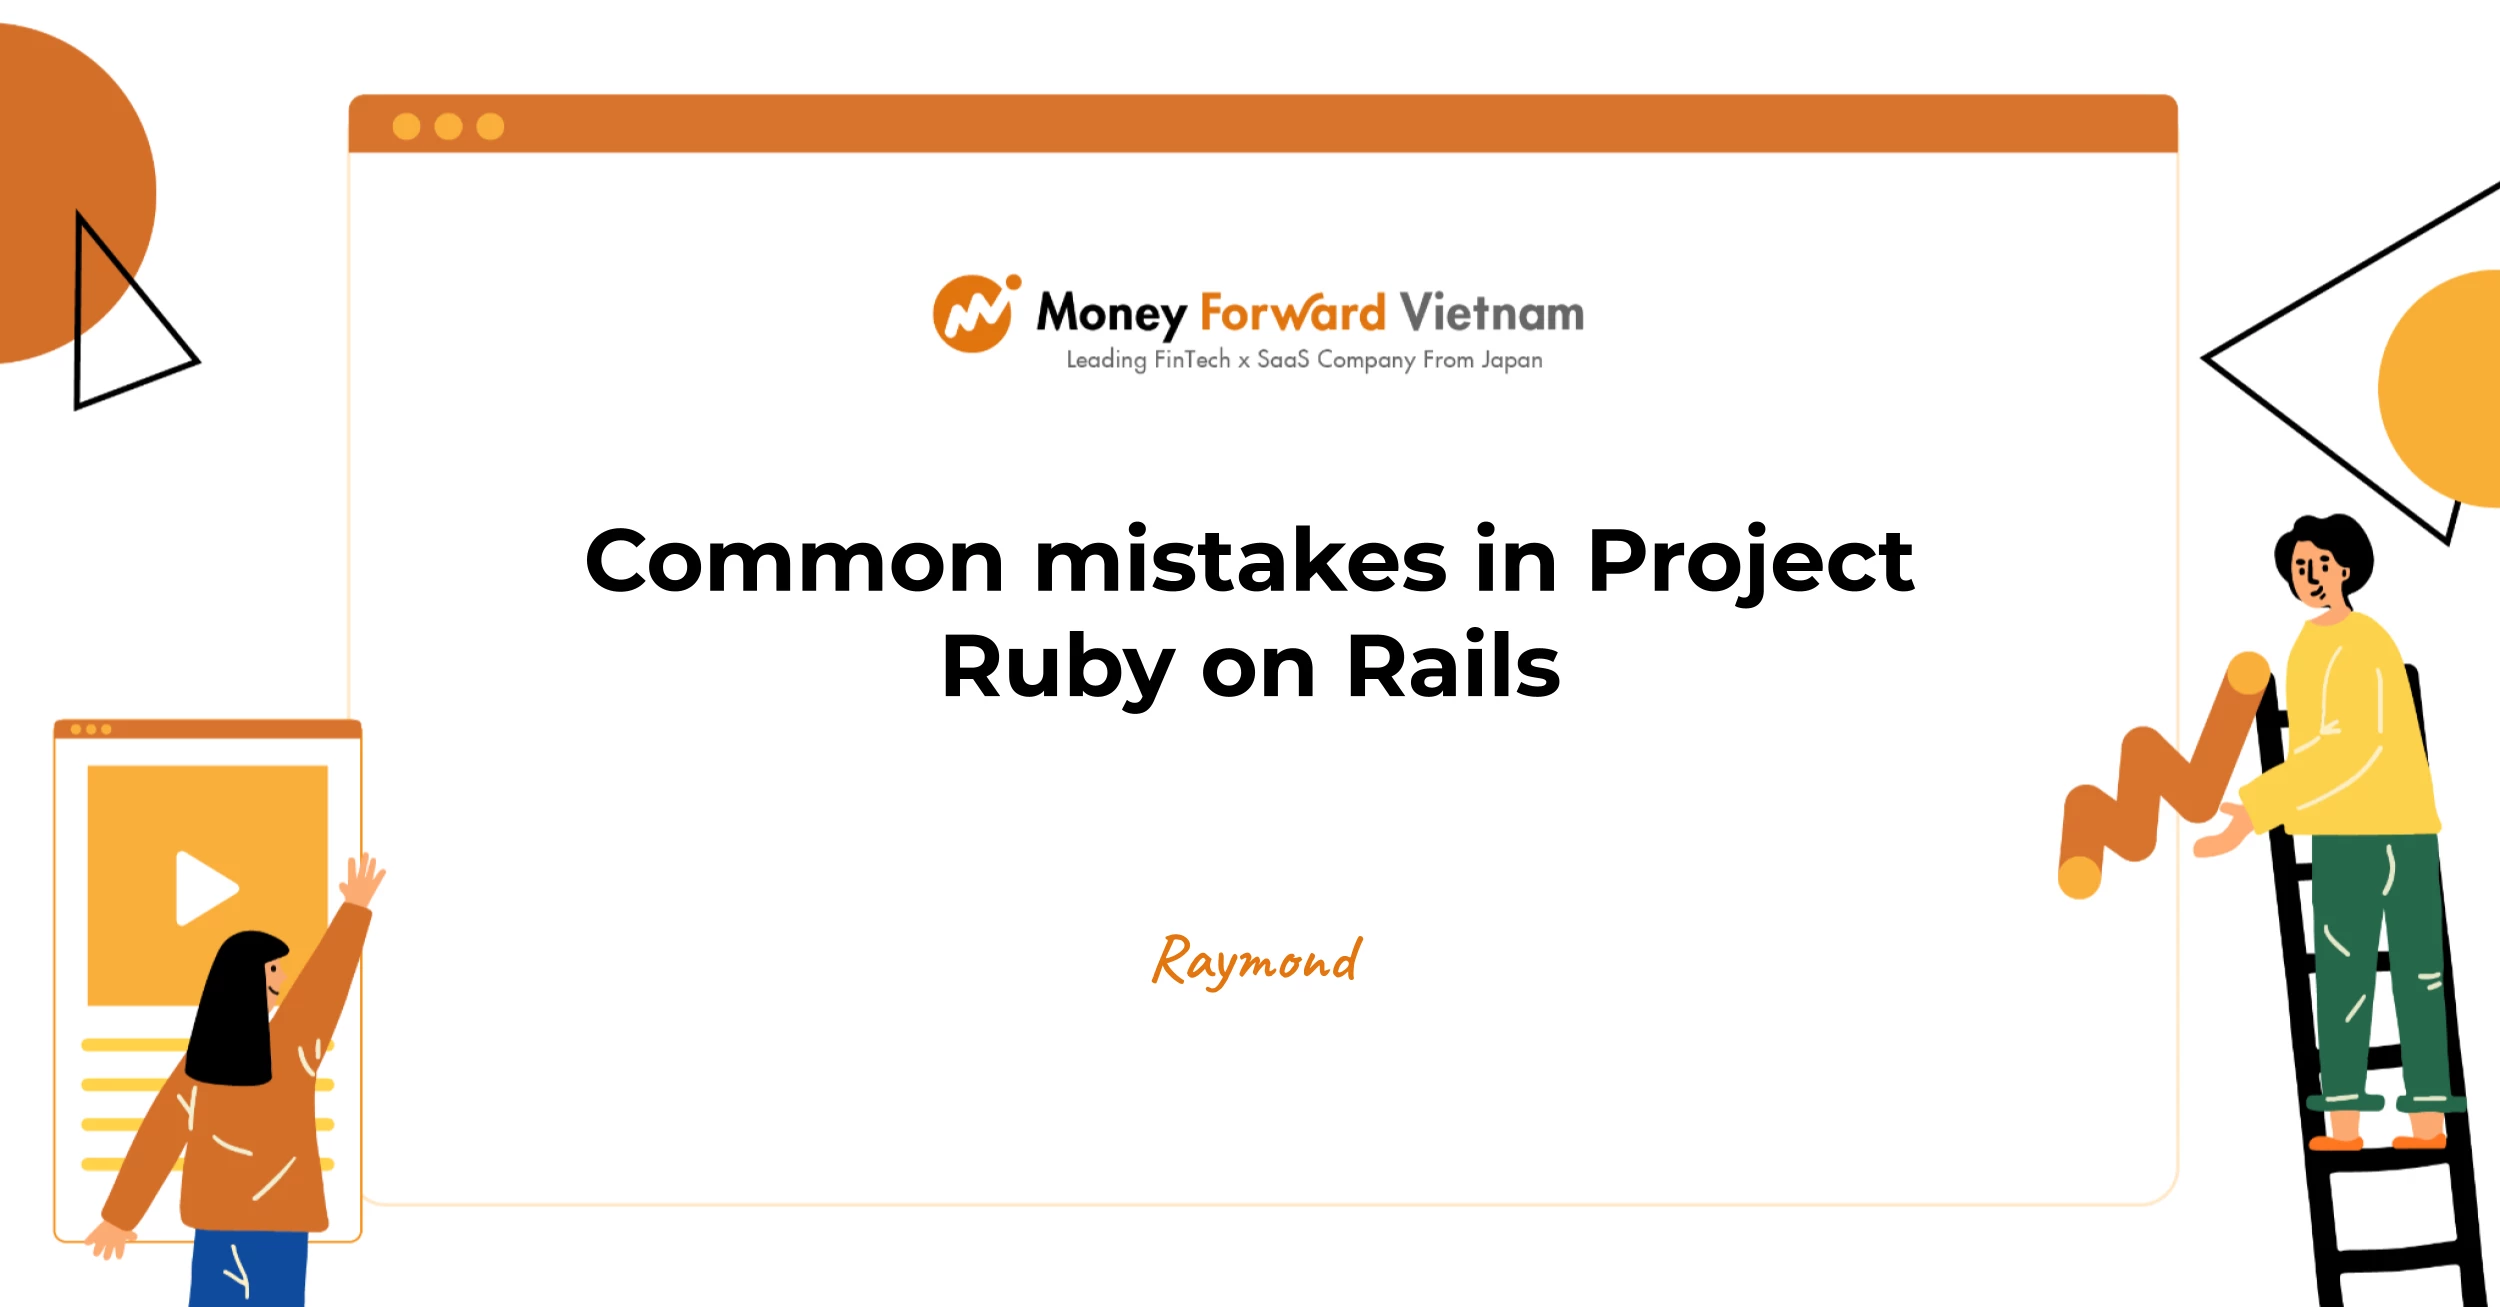 Common mistakes in Project Ruby on Rails